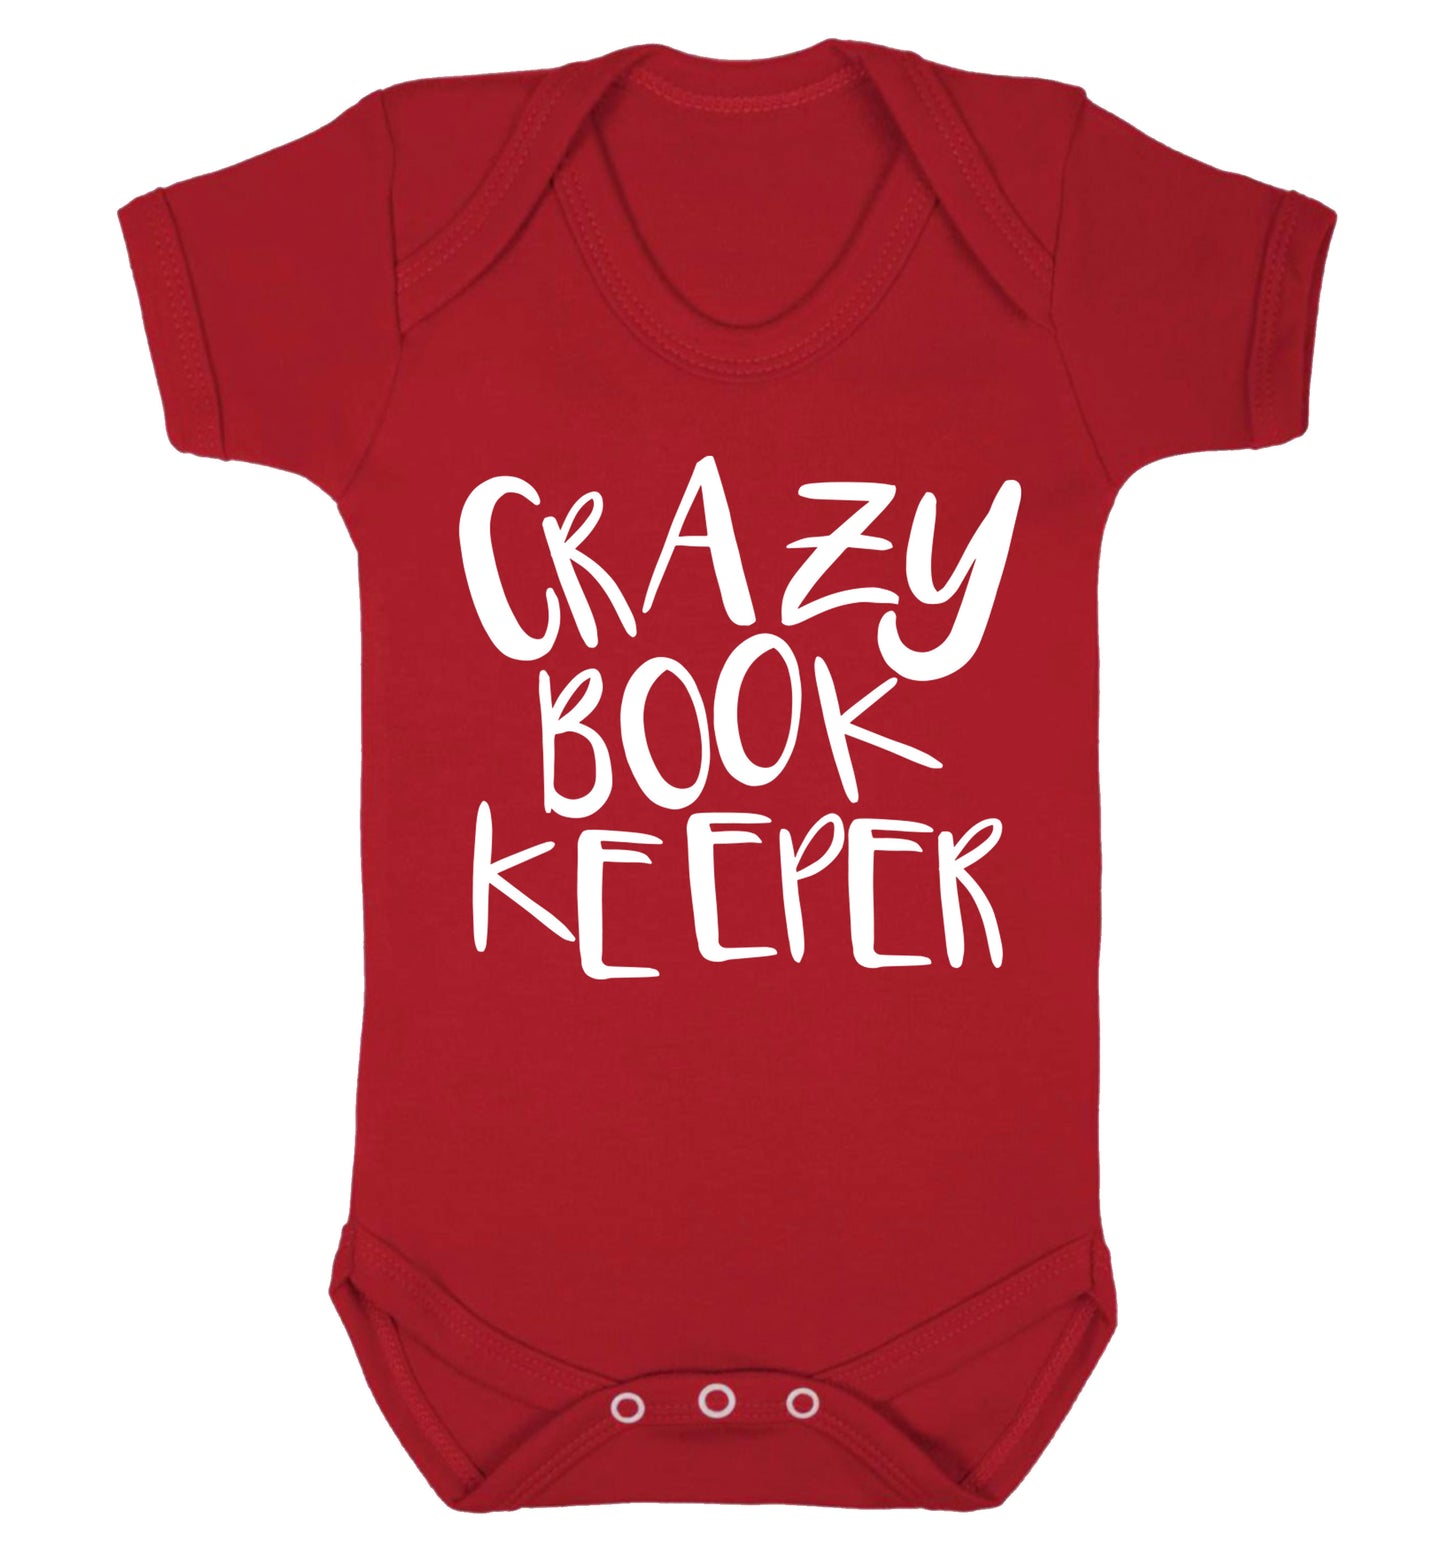 Crazy bookkeeper Baby Vest red 18-24 months